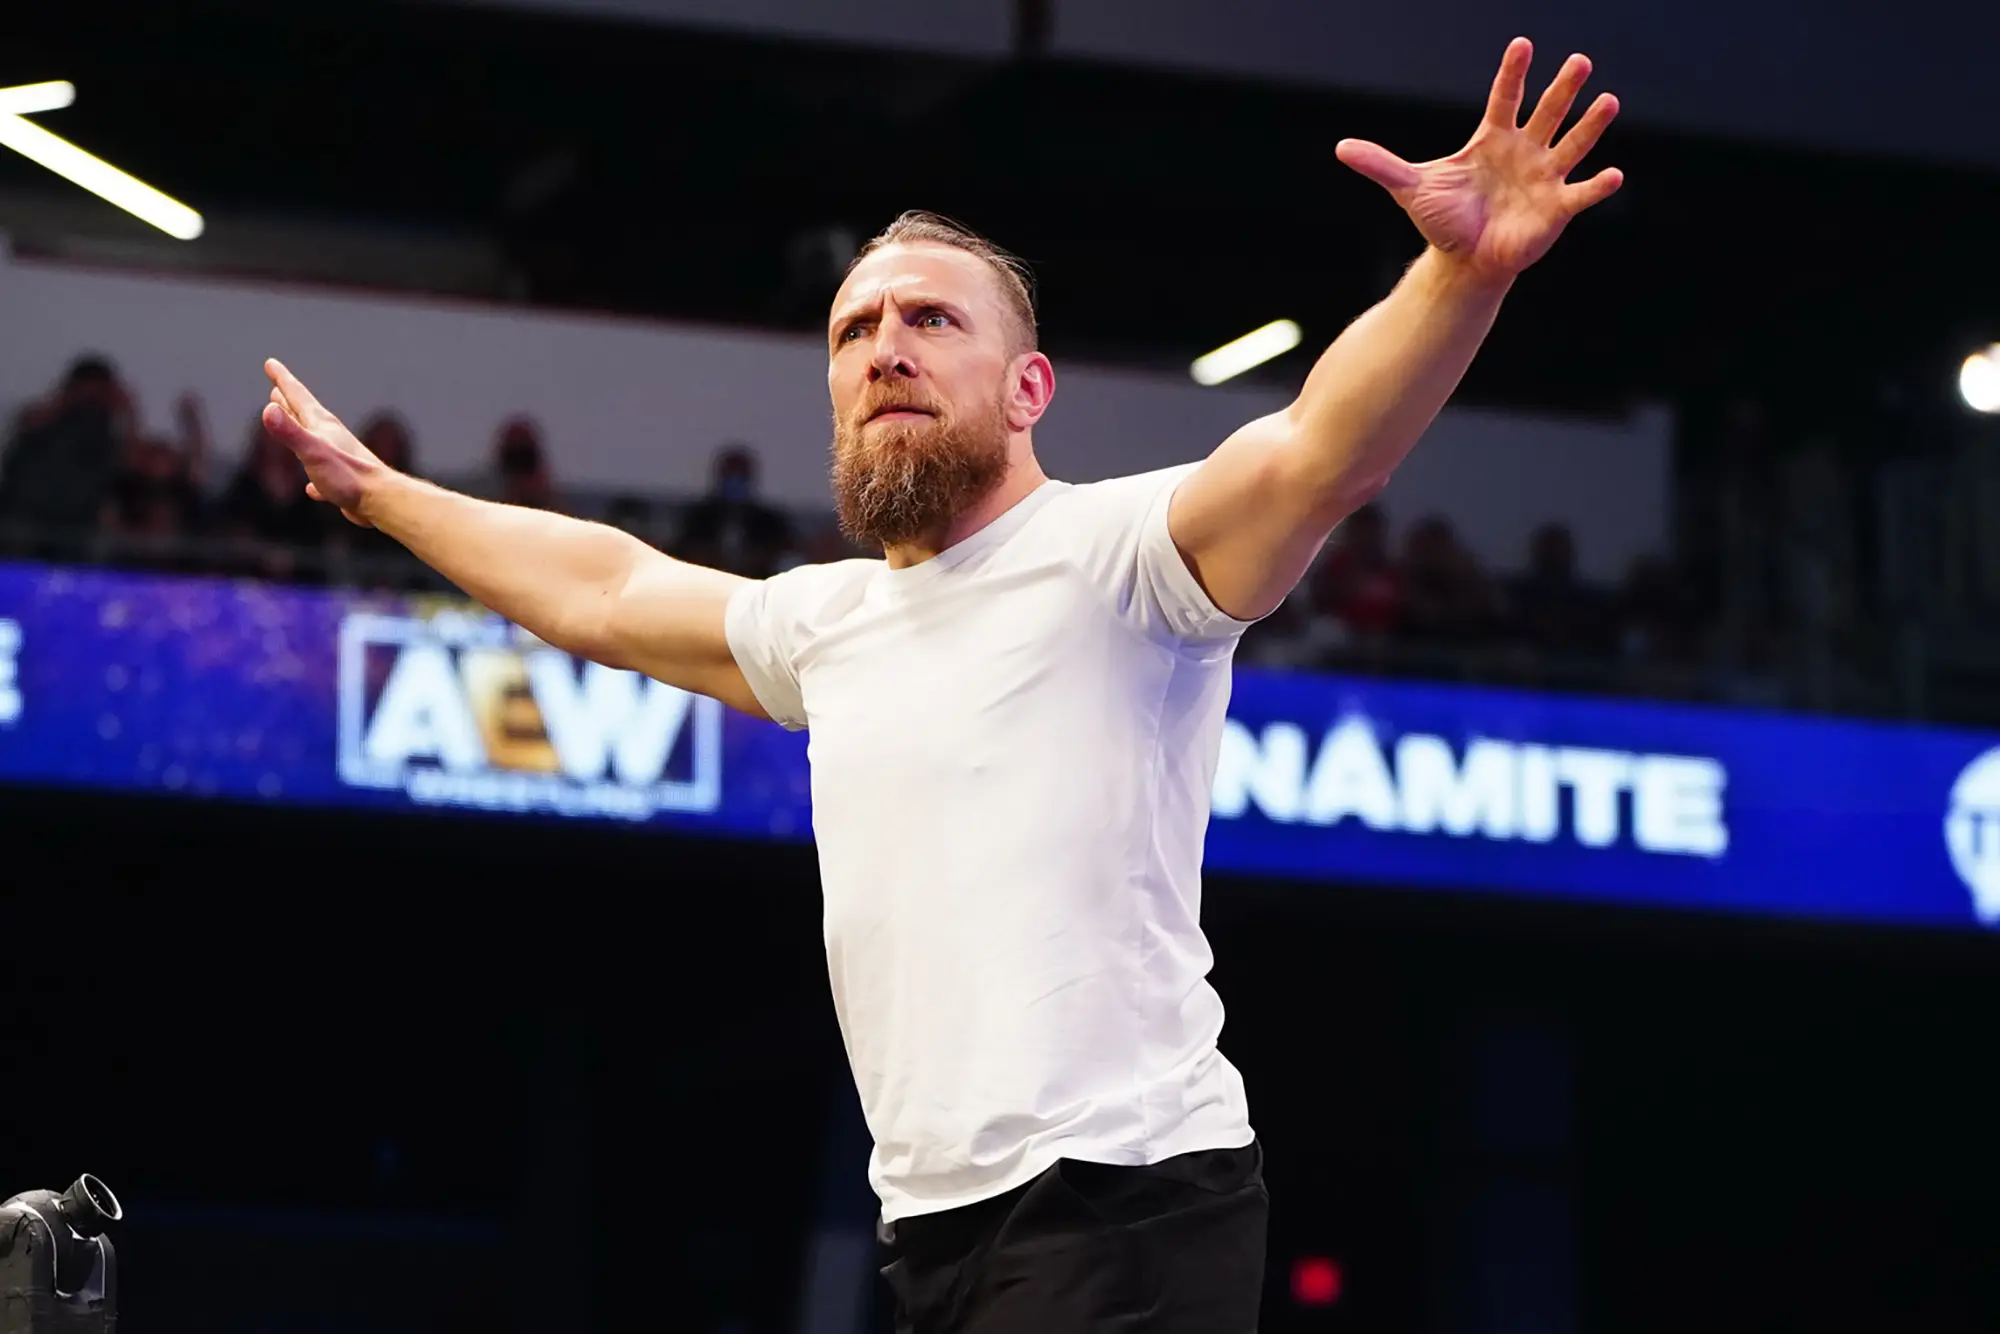 Bryan Danielson admits that his intense passion for wrestling makes it incredibly difficult for him to let go.